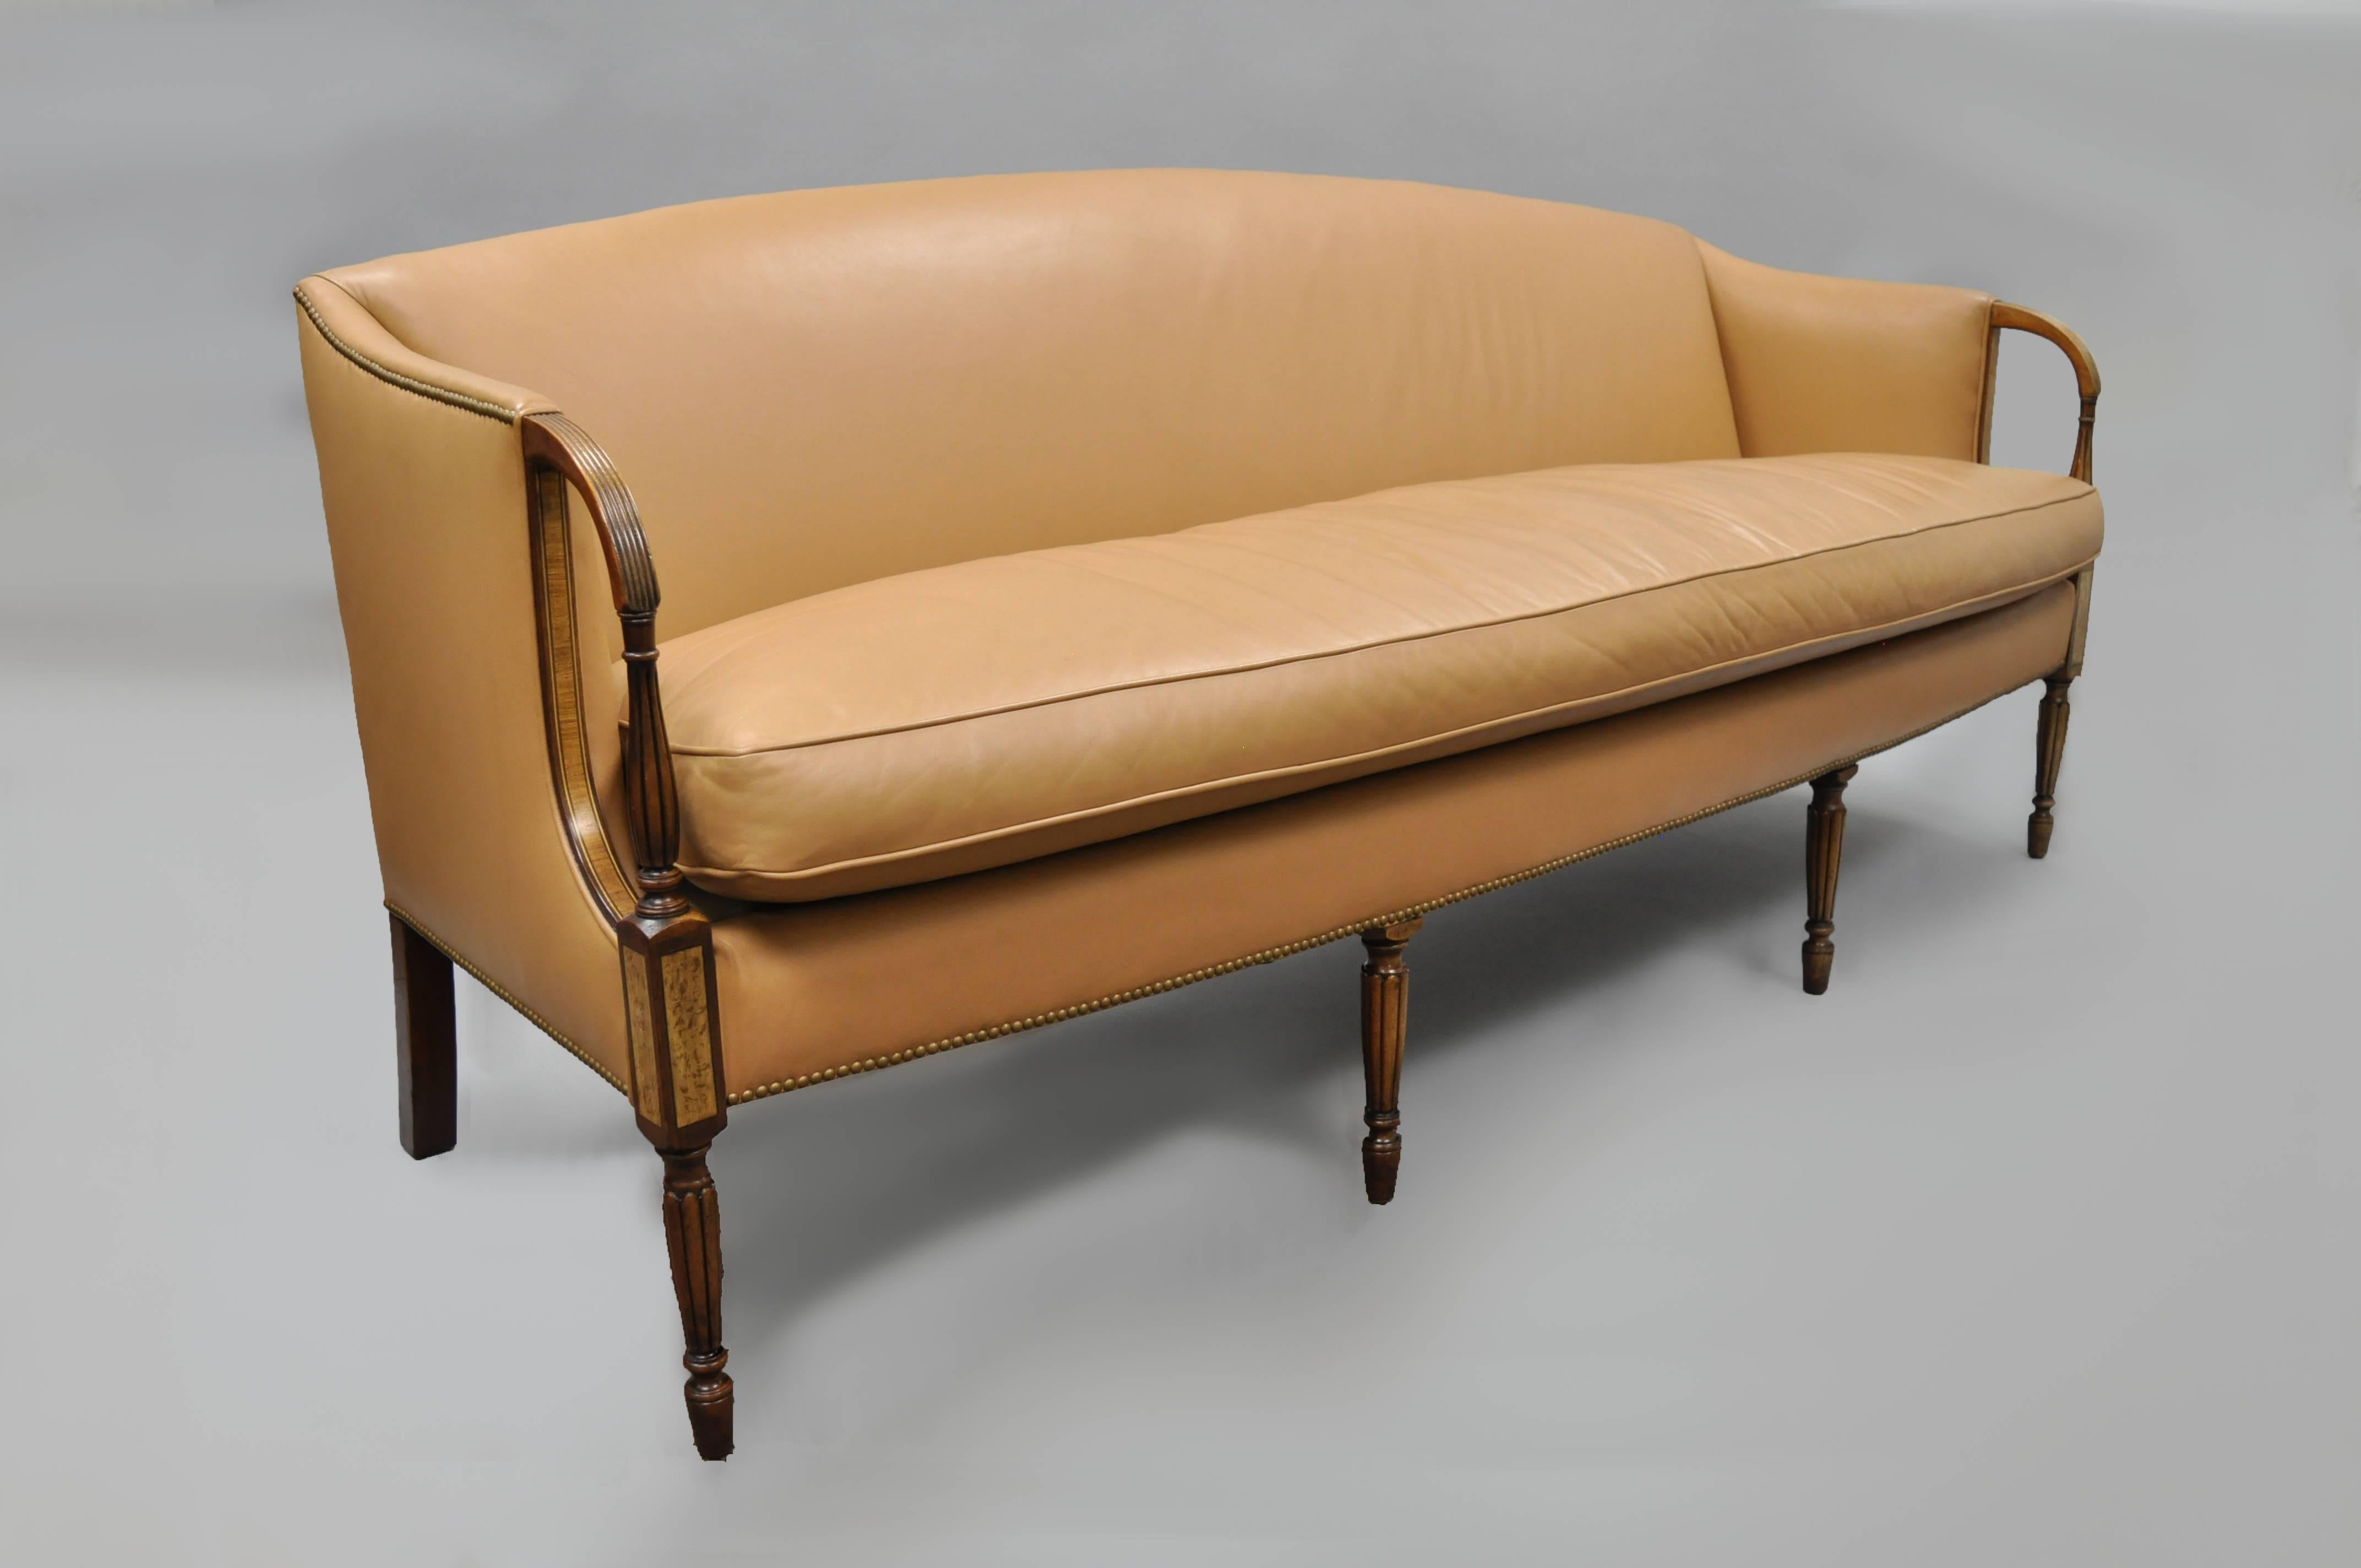 Late 20th Century Sheraton / Federal Style Caramel Leather Upholstered Sofa by Southwood. Item features solid wood construction, leather upholstery, tapered legs, nice inlay, banded details, quality American craftsmanship, branded Southwood in the